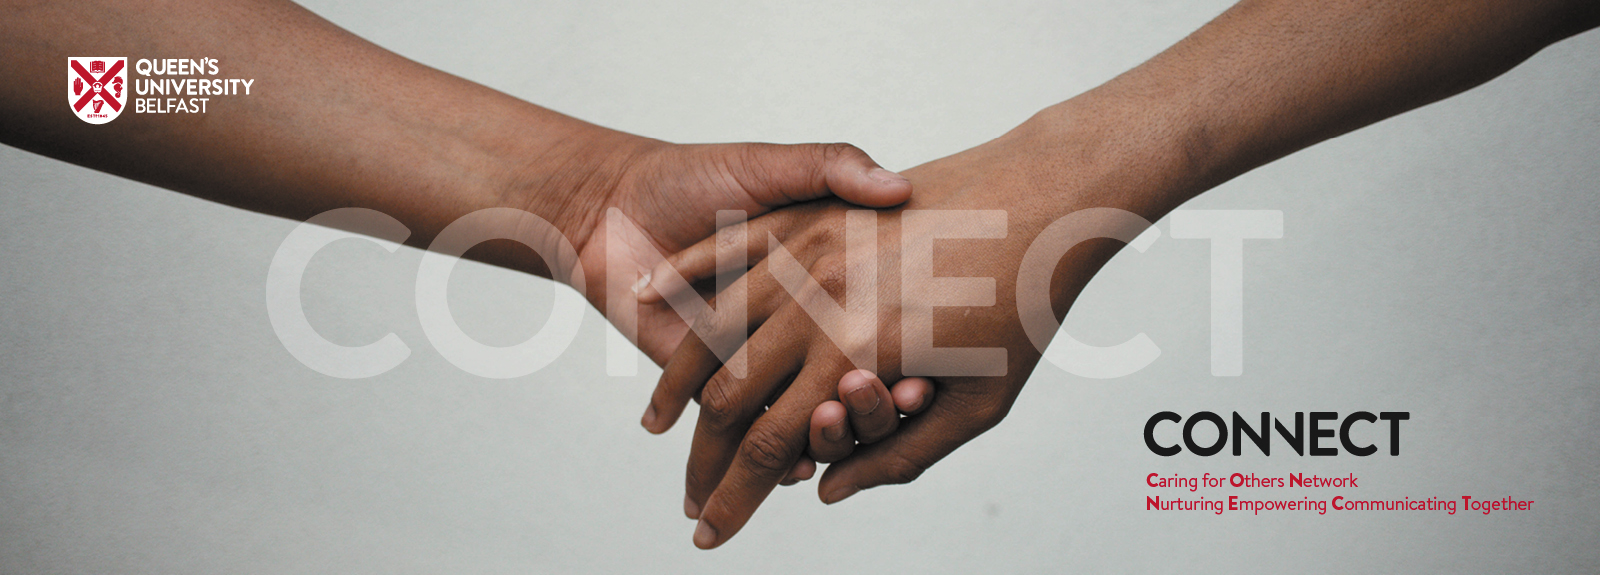 Image shows two hands reaching out to one another. Image reads: CONNECT. Caring for Others Network. Nurturing, Empowering, Communicating Together